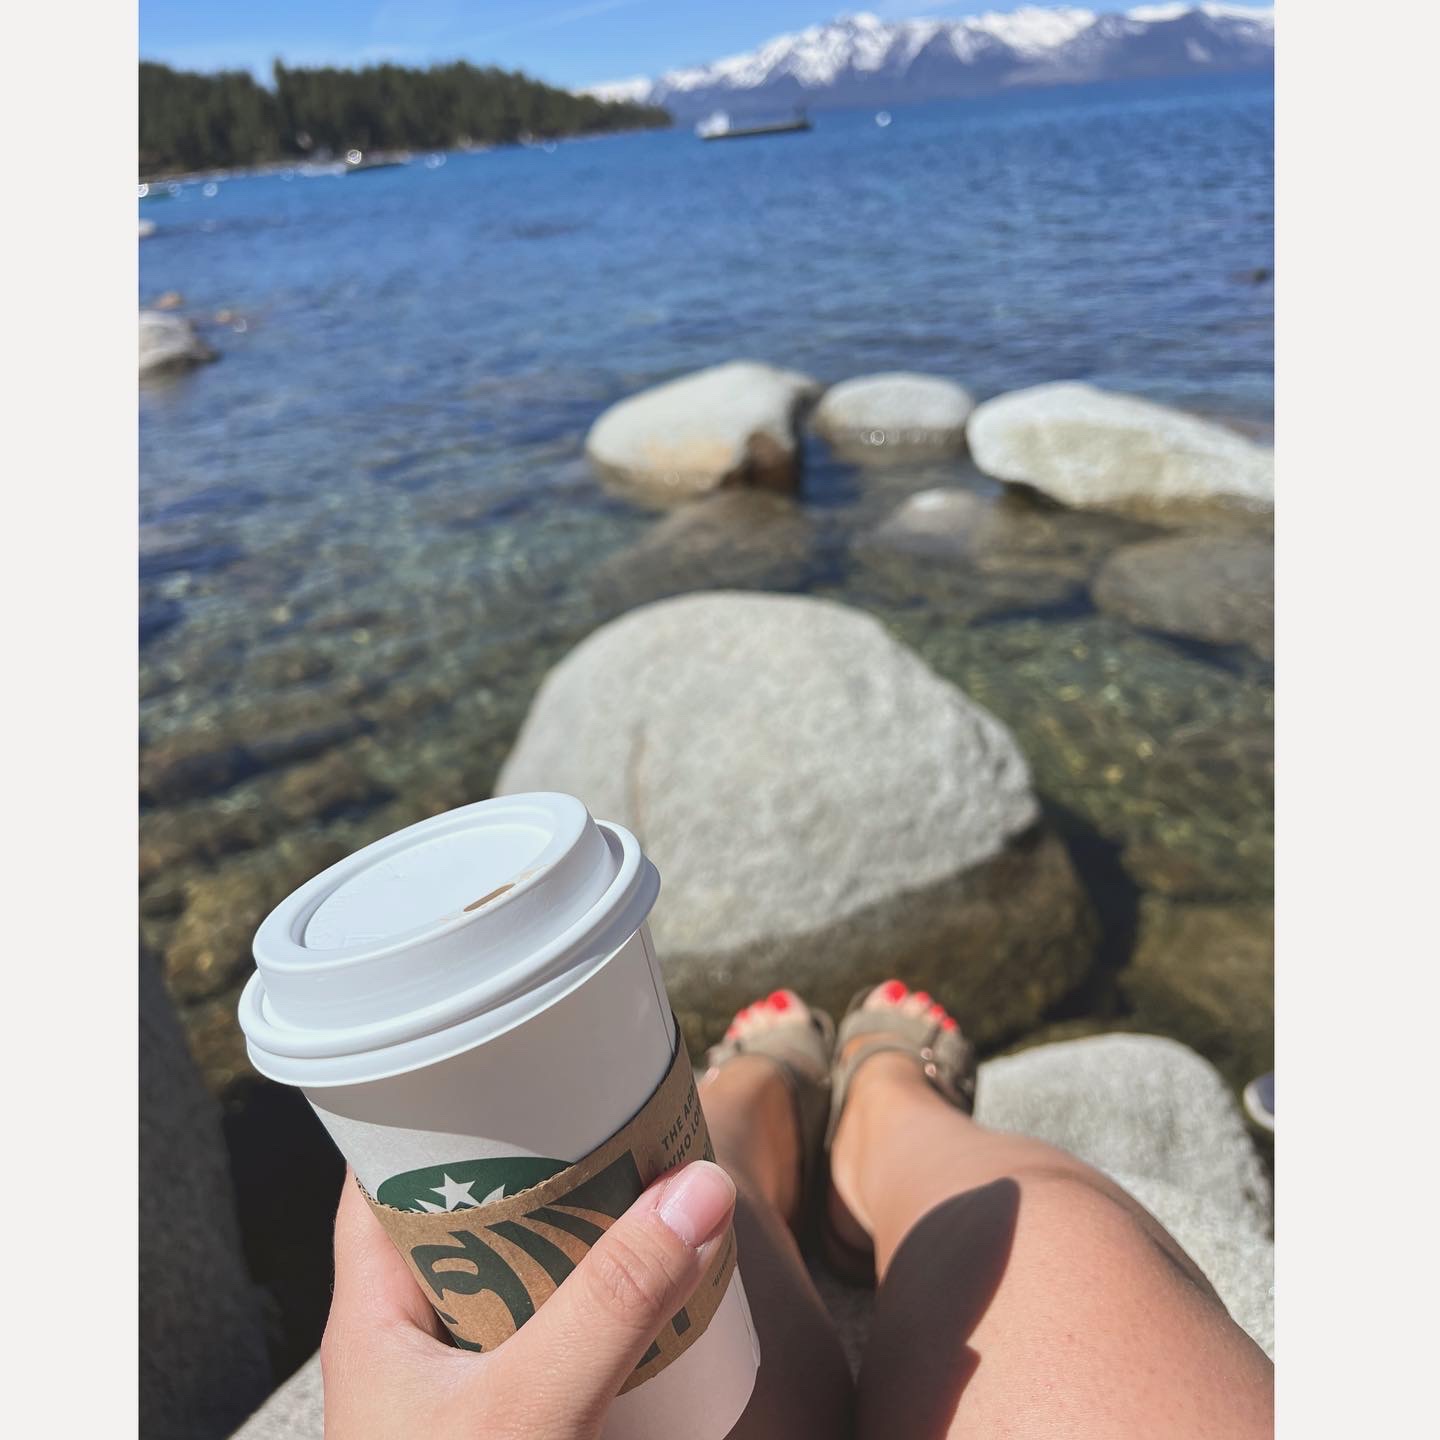 Person sitting on rocks on the coast of a lake, holding a Starbucks cup